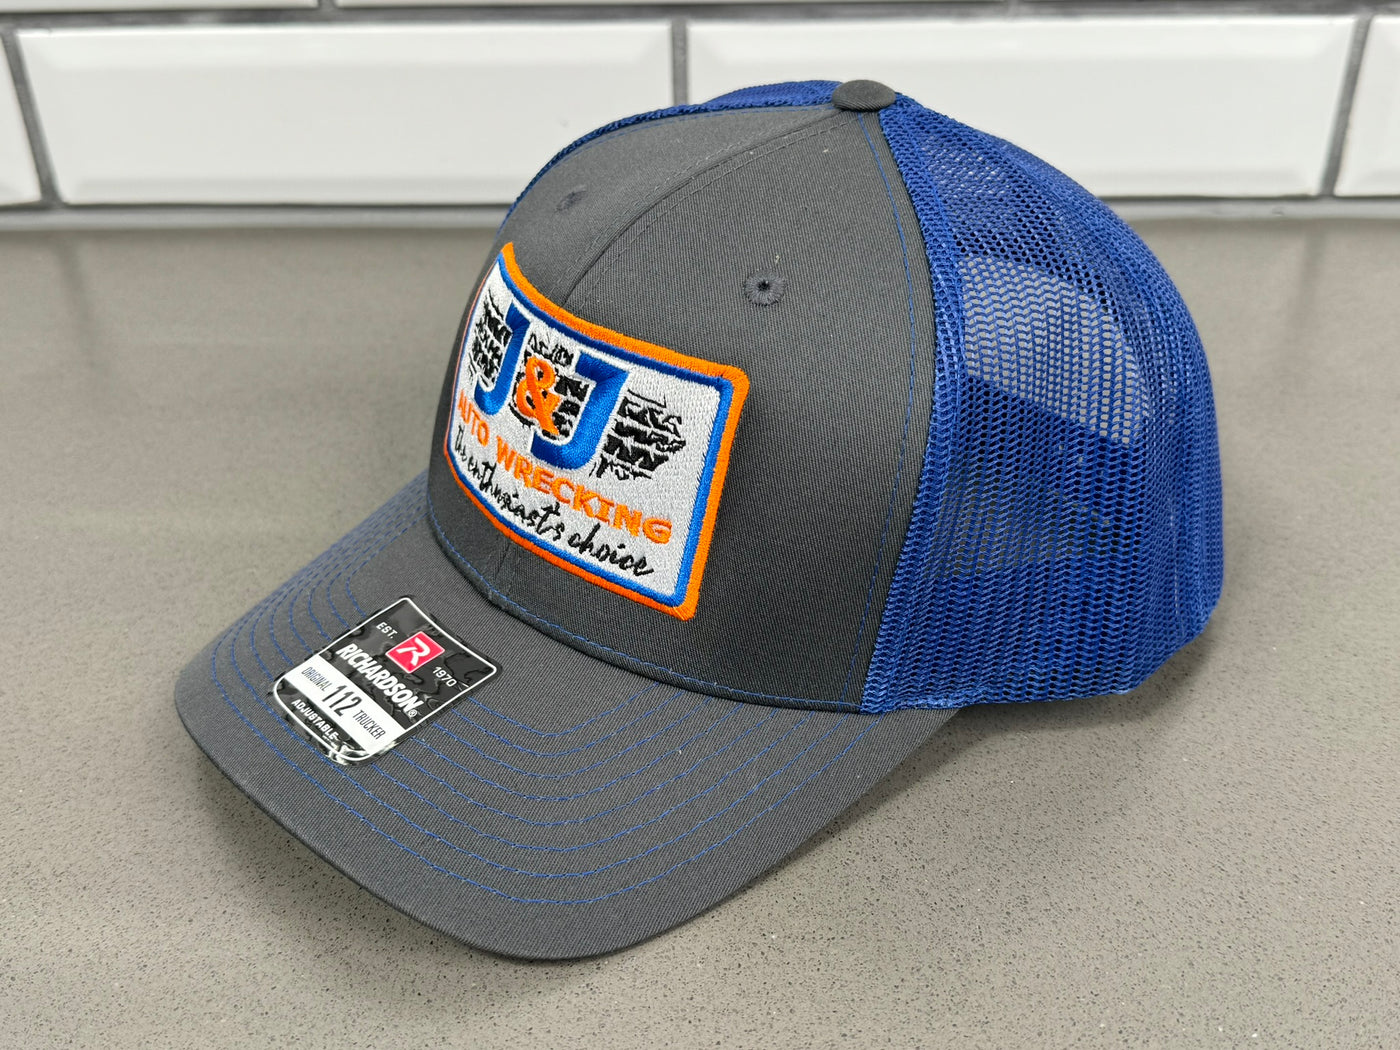 J&J Gray & Royal Blue Embroidered Richardson 112 Trucker Adjustable Hat with Free Shipping